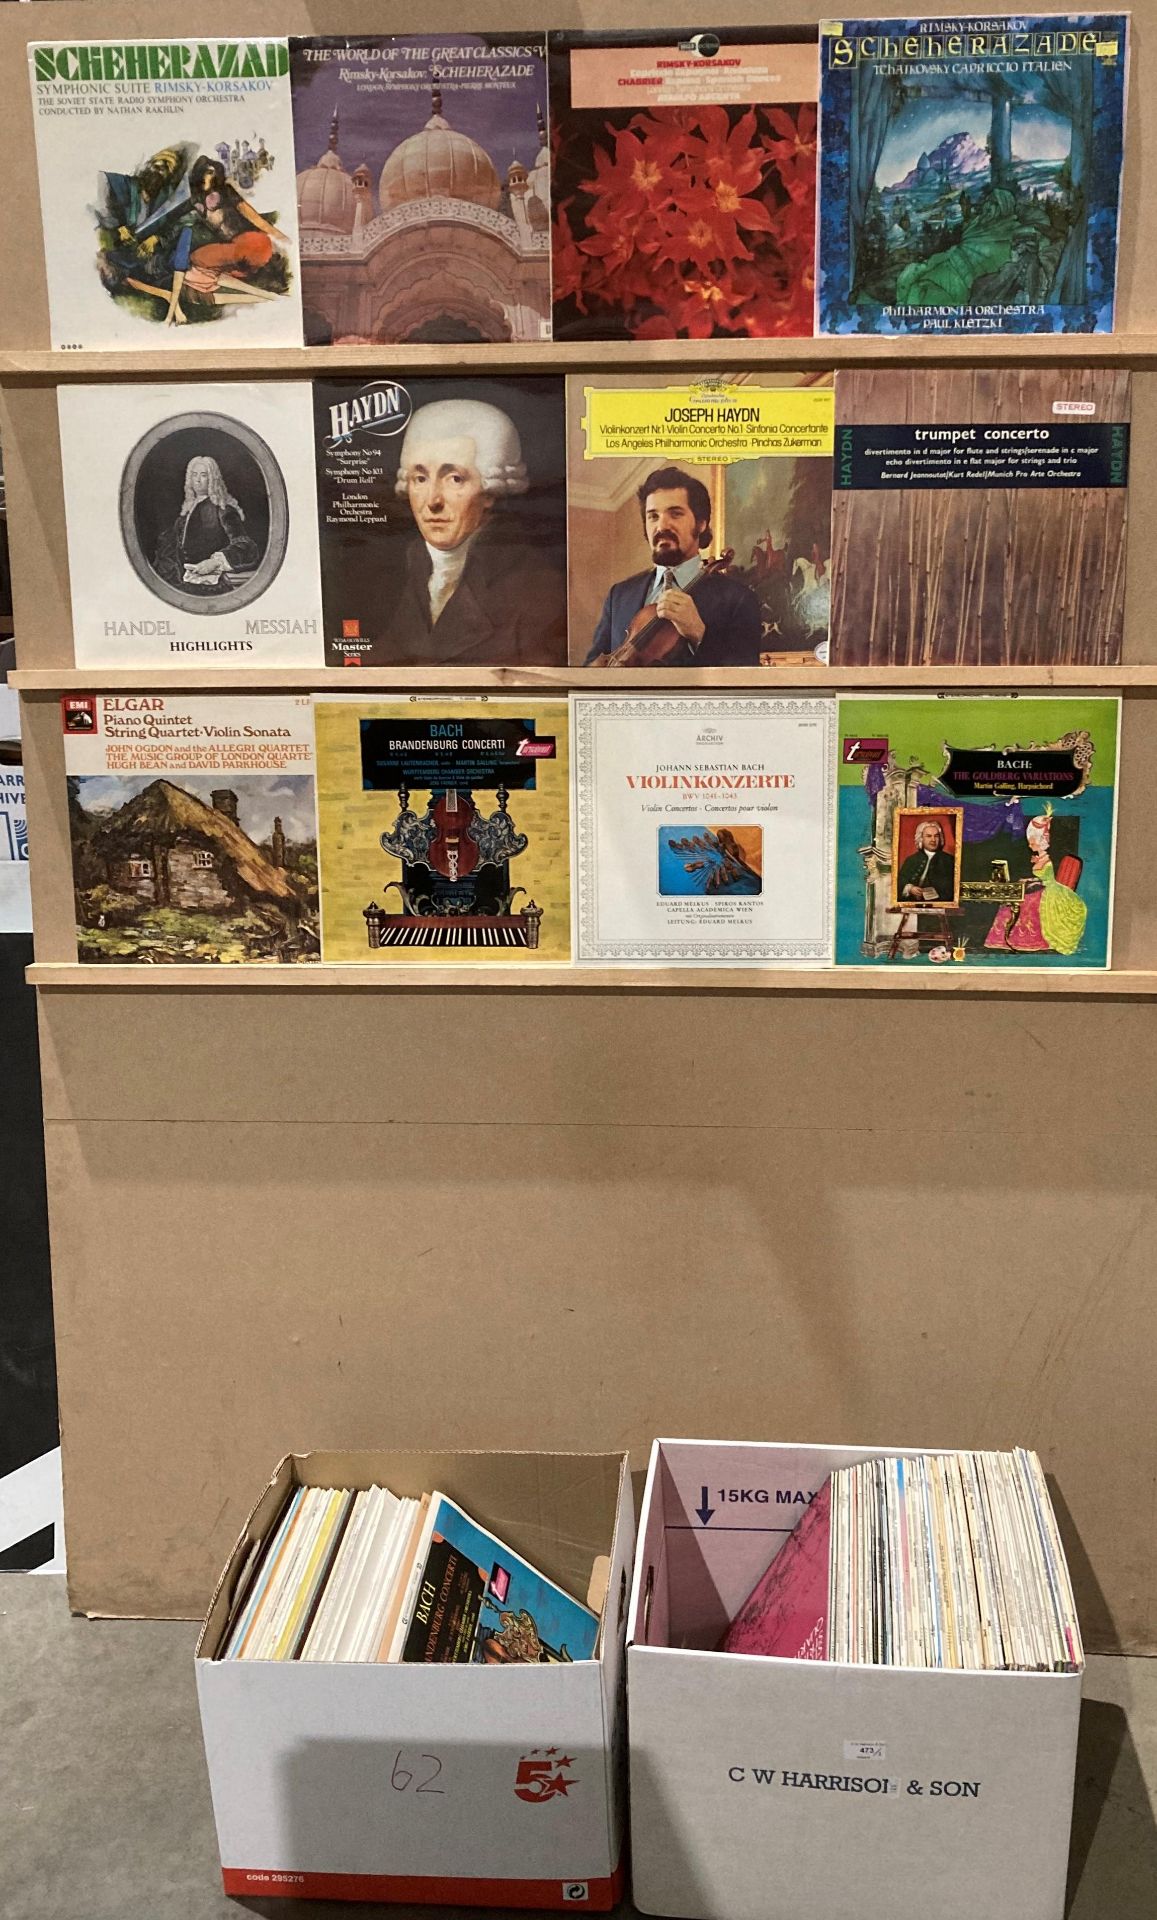 Contents to two boxes - approximately 115 assorted music LPs (mainly classical music) including